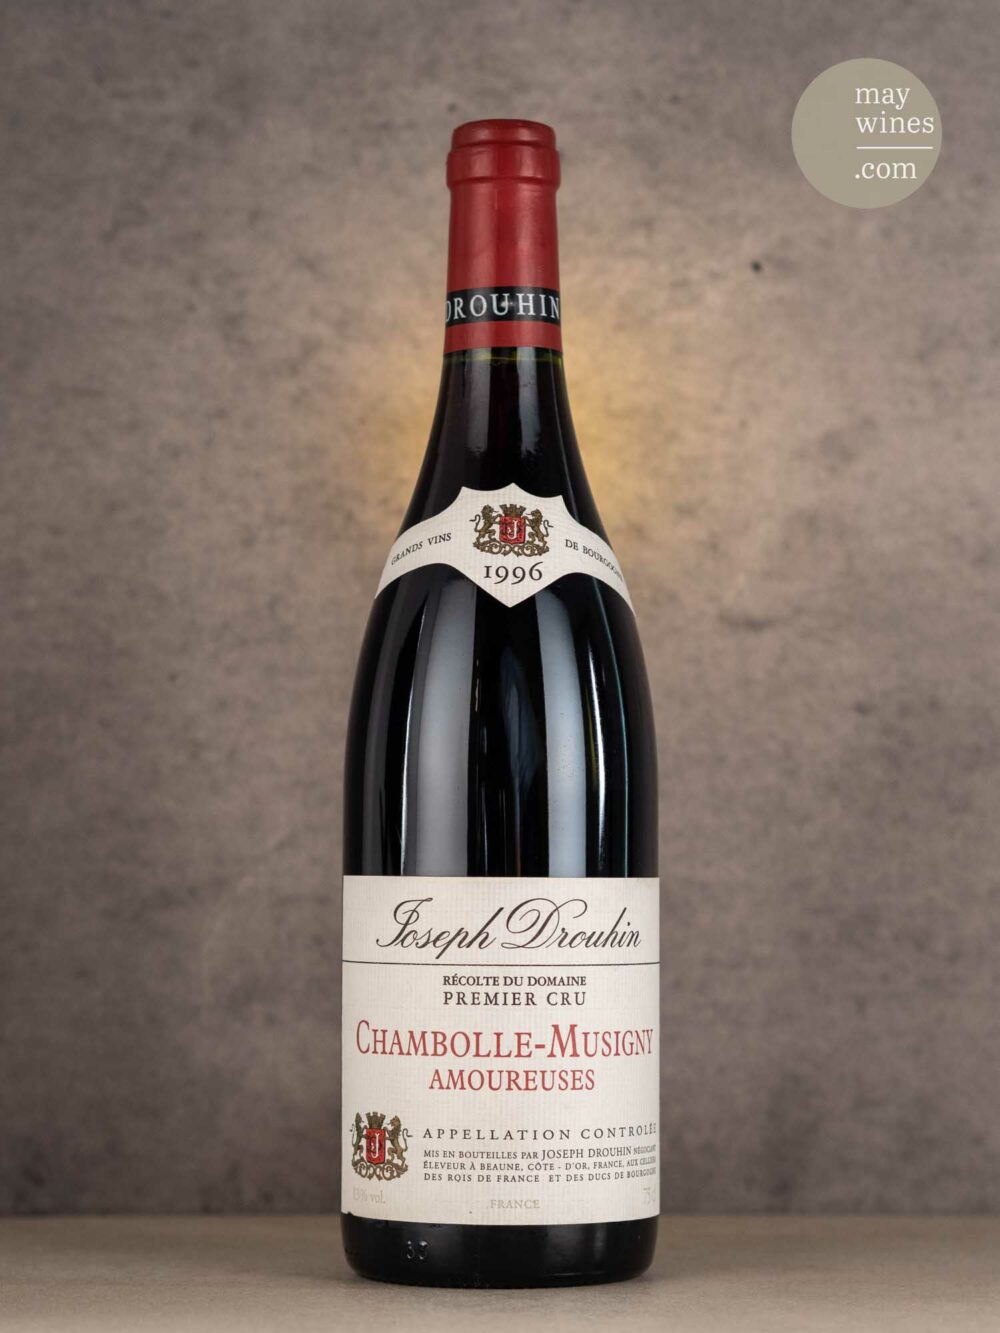 May Wines – Rotwein – 1996 Chambolle-Musigny Les Amoureuses Premier Cru - Joseph Drouhin